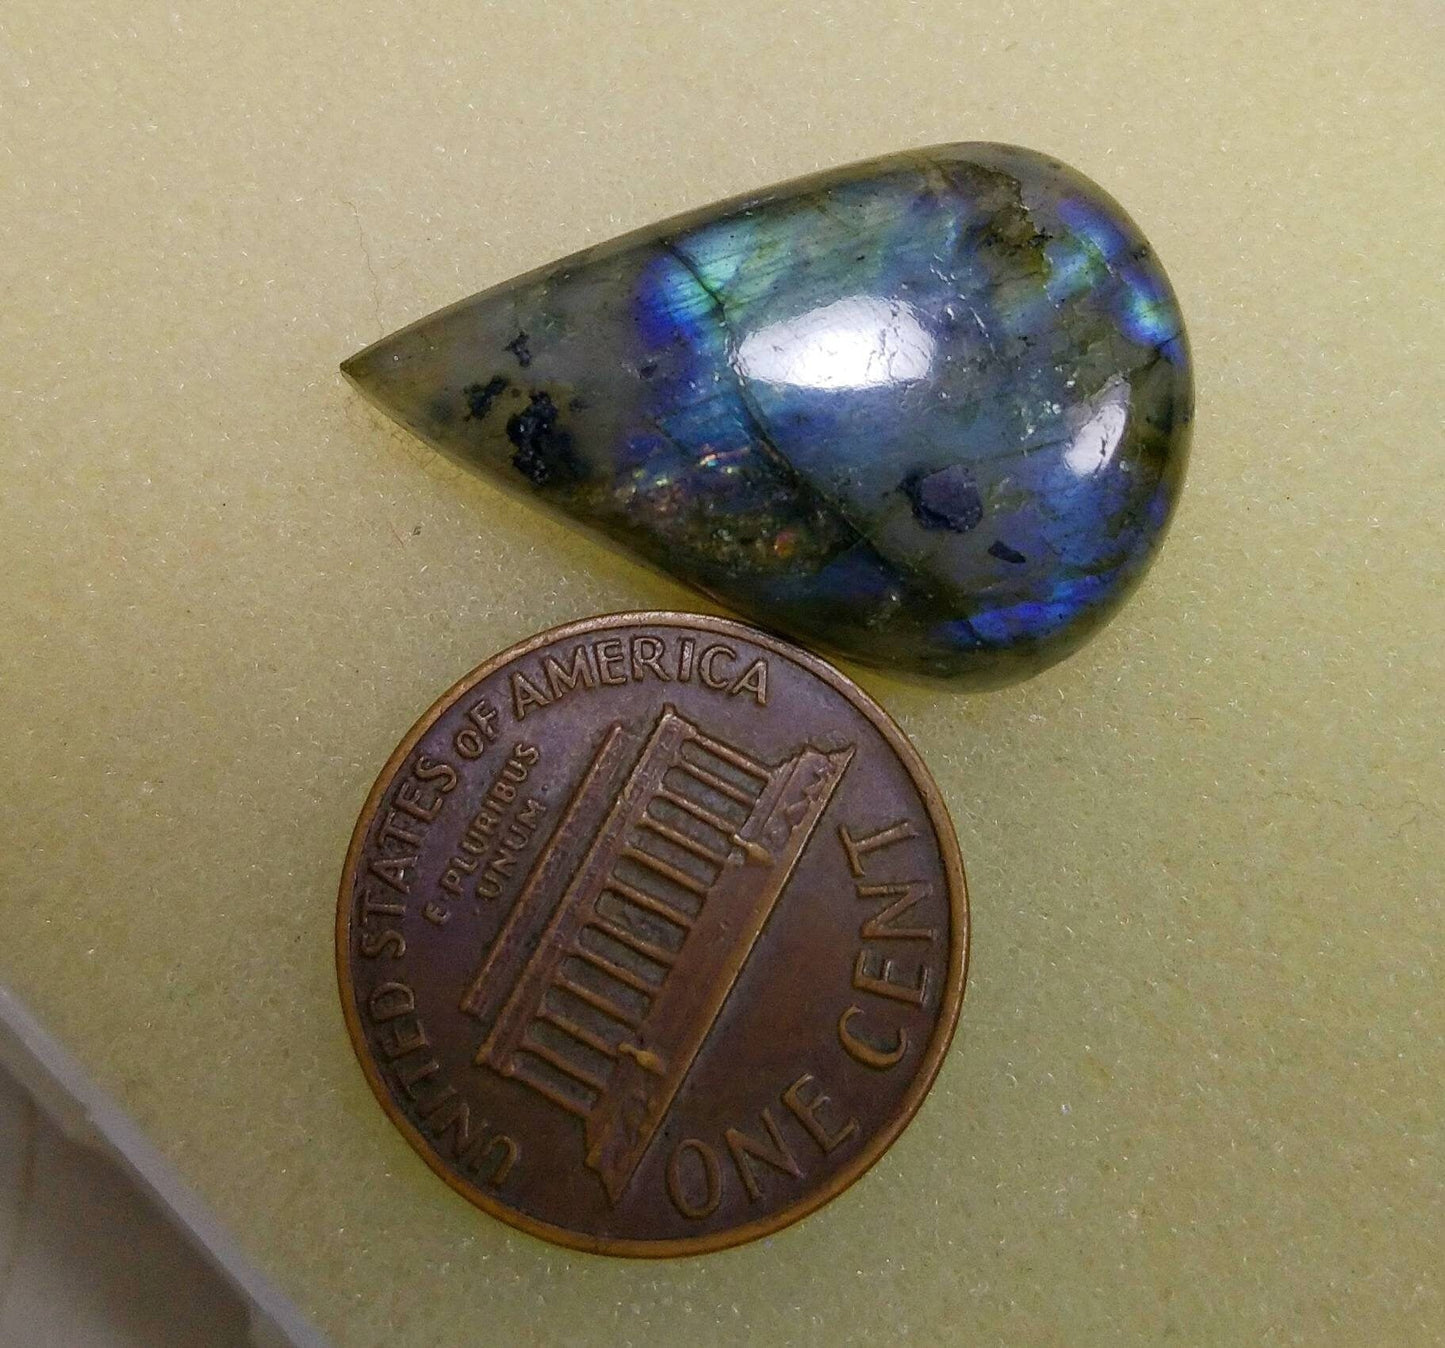 ARSAA GEMS AND MINERALSNatural fine quality beautiful 22 carats pear shape labradorite cabochon - Premium  from ARSAA GEMS AND MINERALS - Just $15.00! Shop now at ARSAA GEMS AND MINERALS